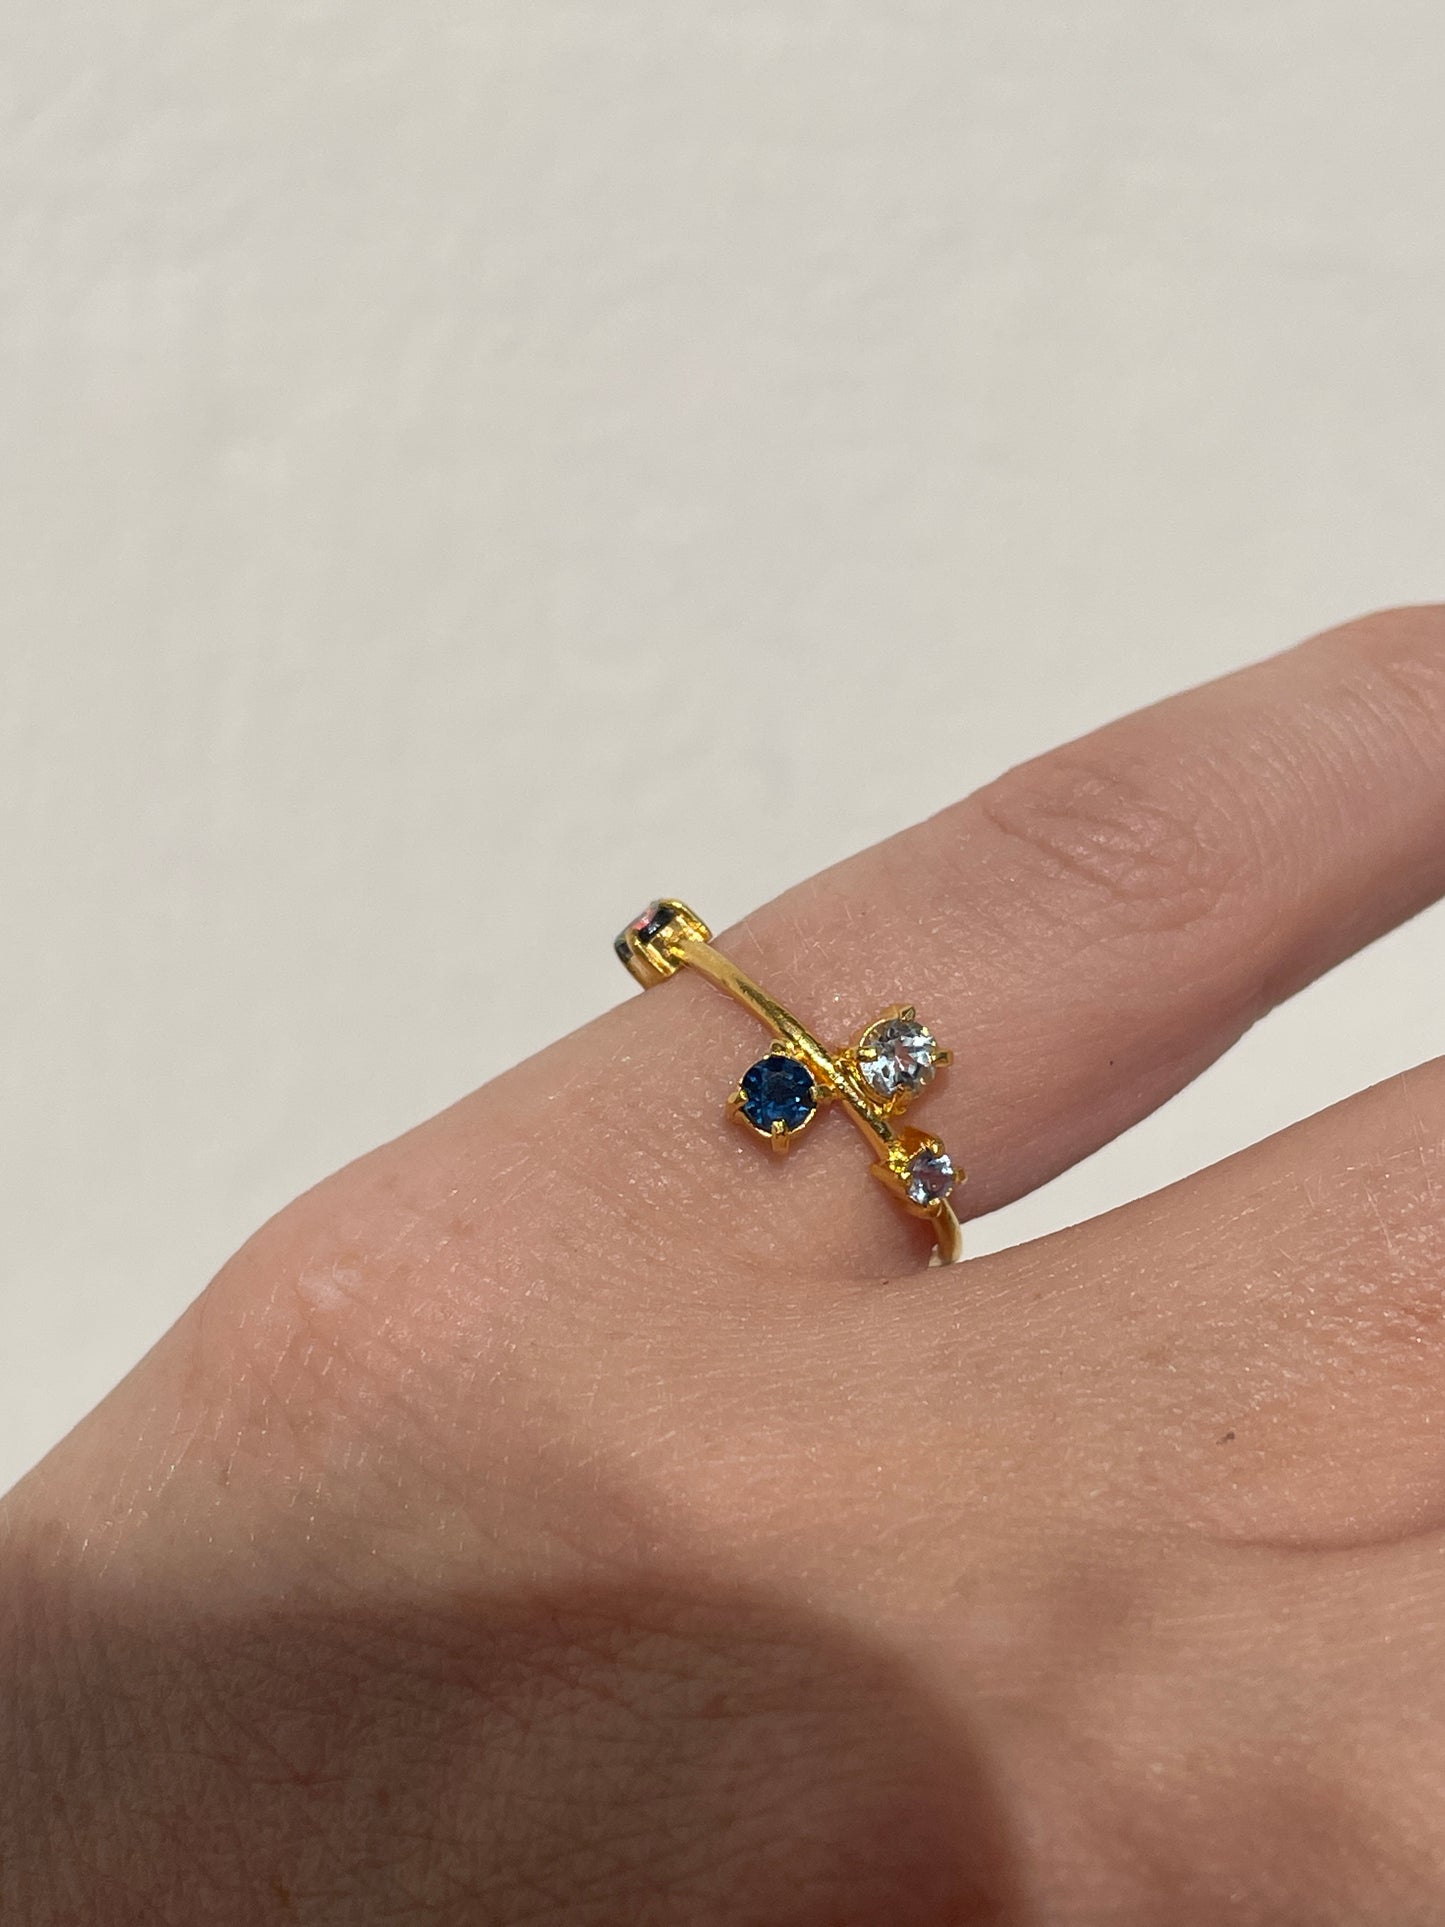 Galaxy Ring Gold with Ultramarine Blue Sapphires and Opals - size 6